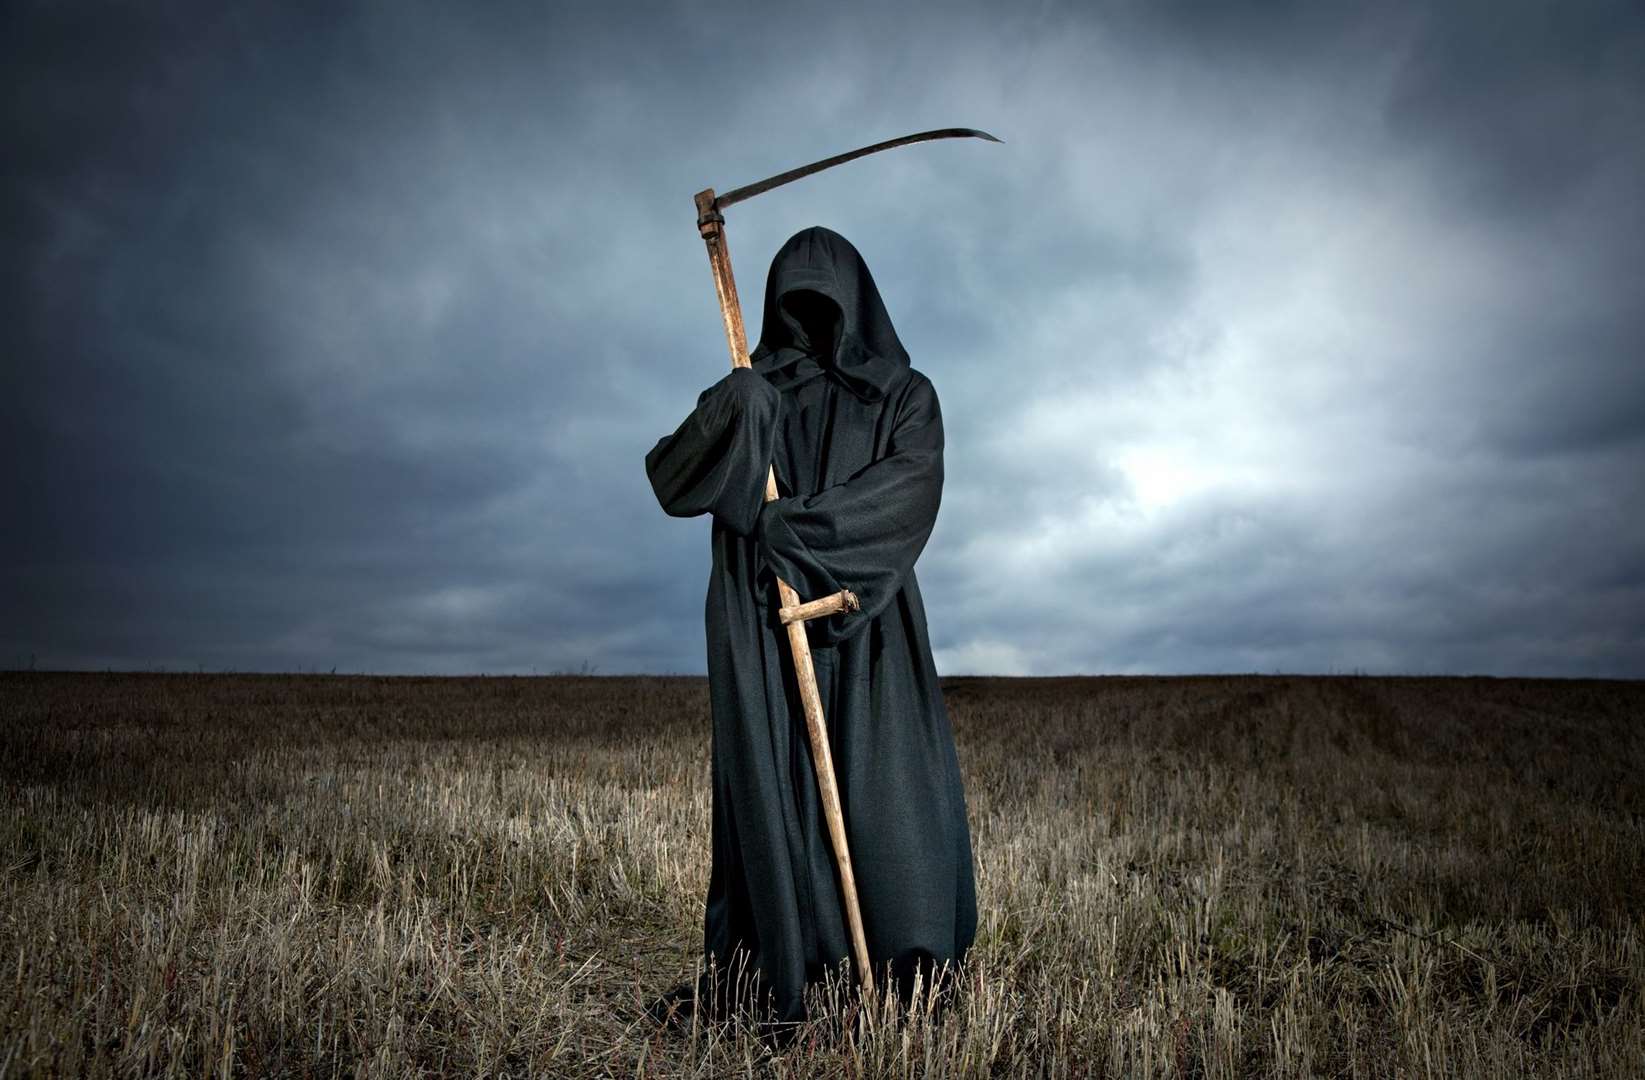 Who will the Grim Reaper be coming for next?